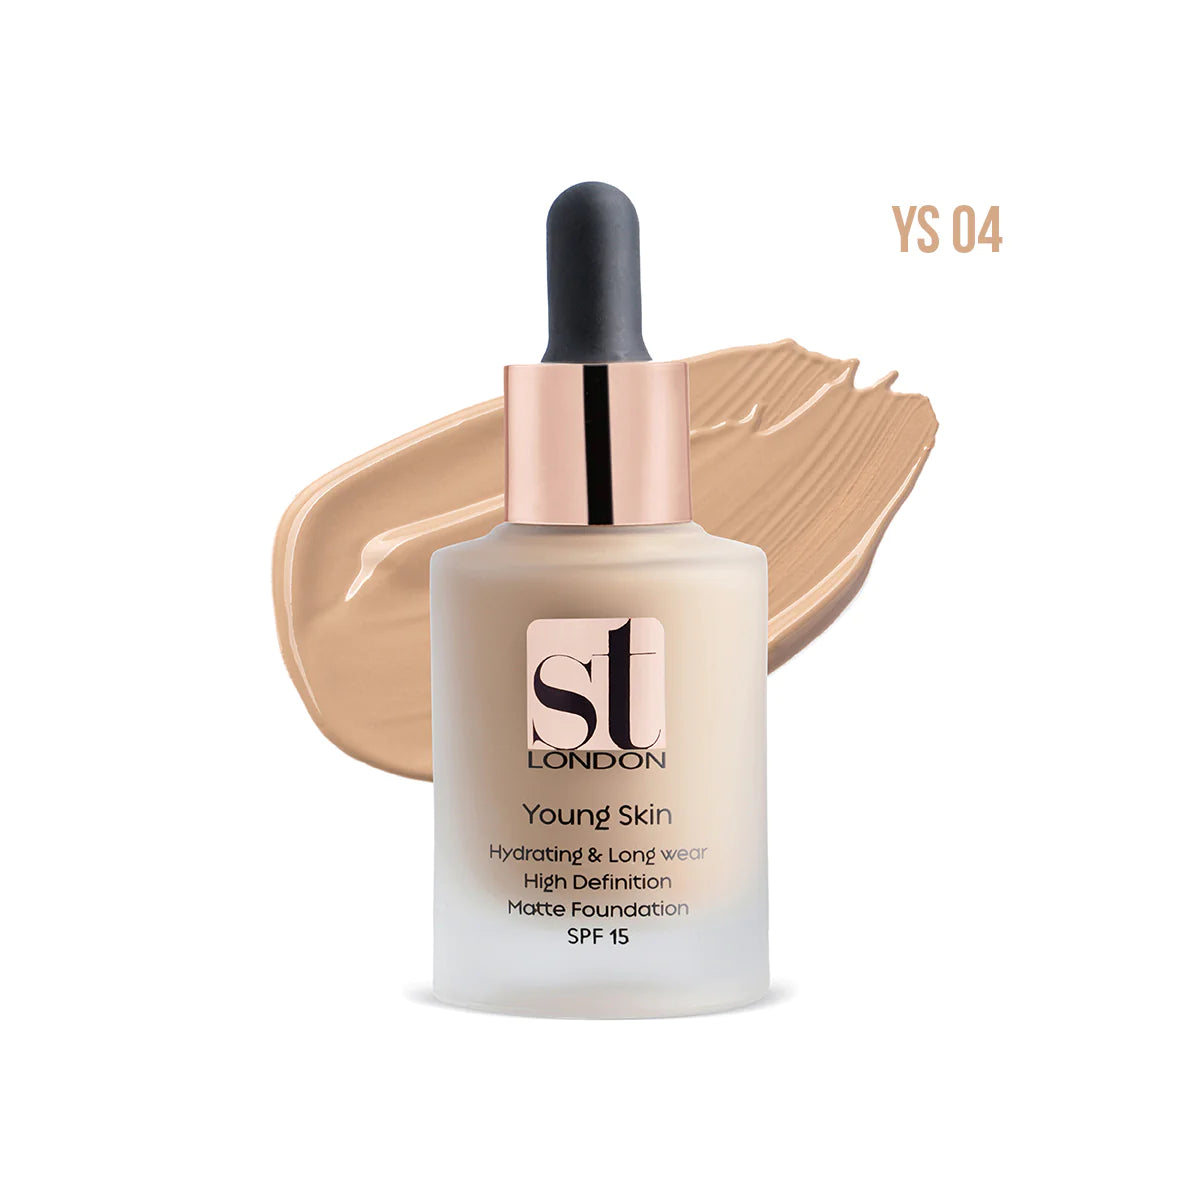 ST-LONDON YS04 YOUNG SKIN FOUNDATION